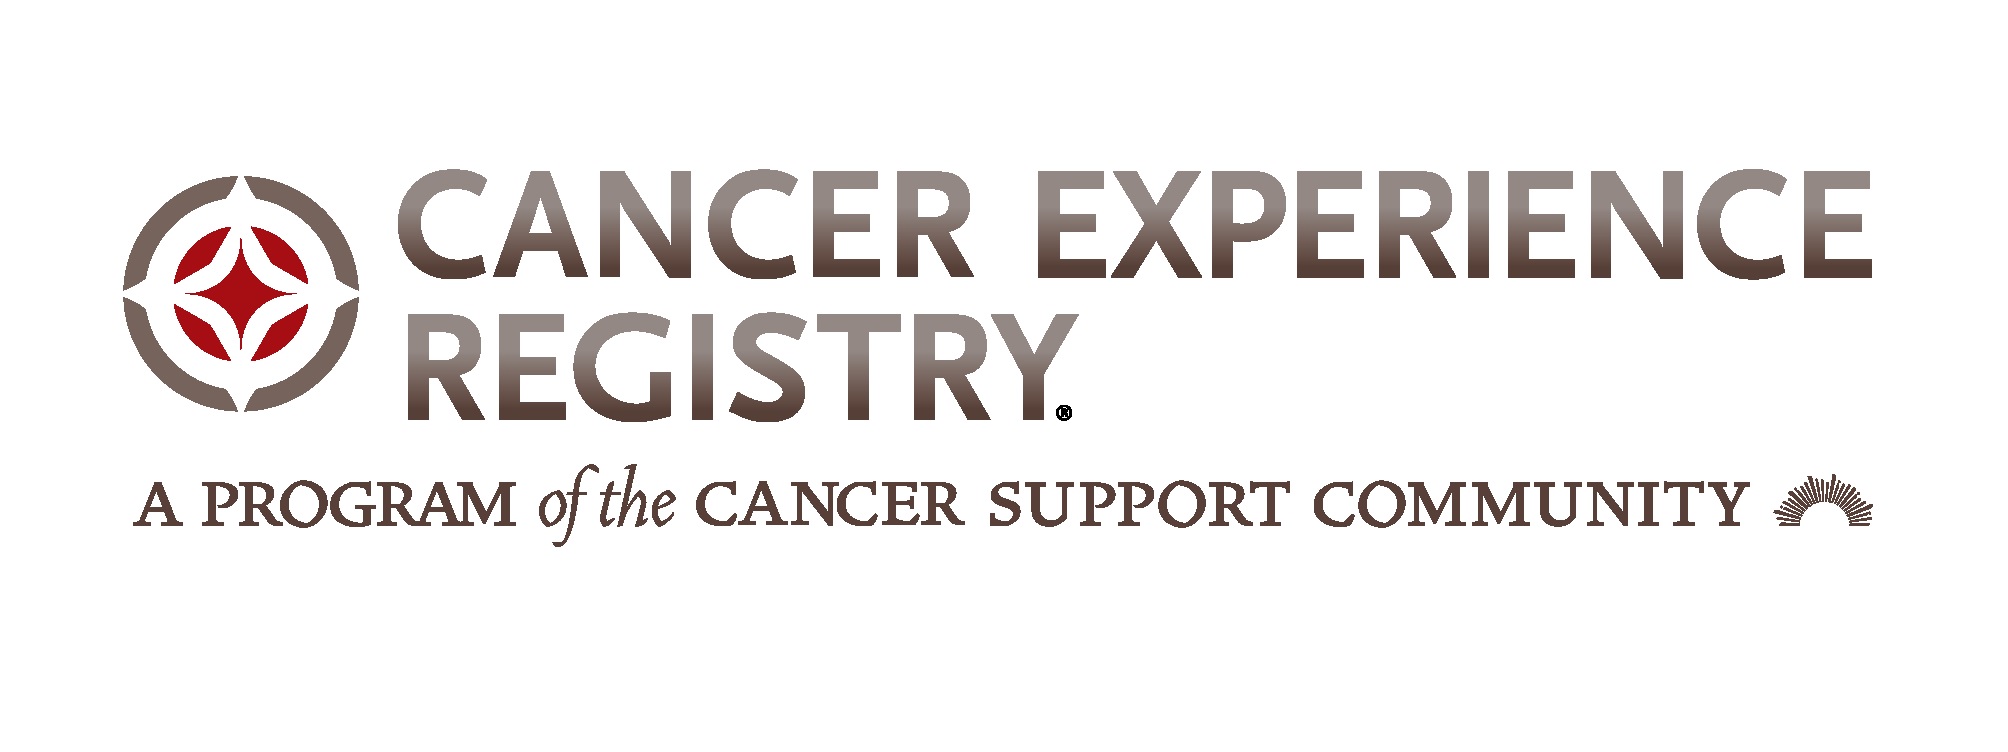 Share your cancer experience and learn from others who share your cancer journey.